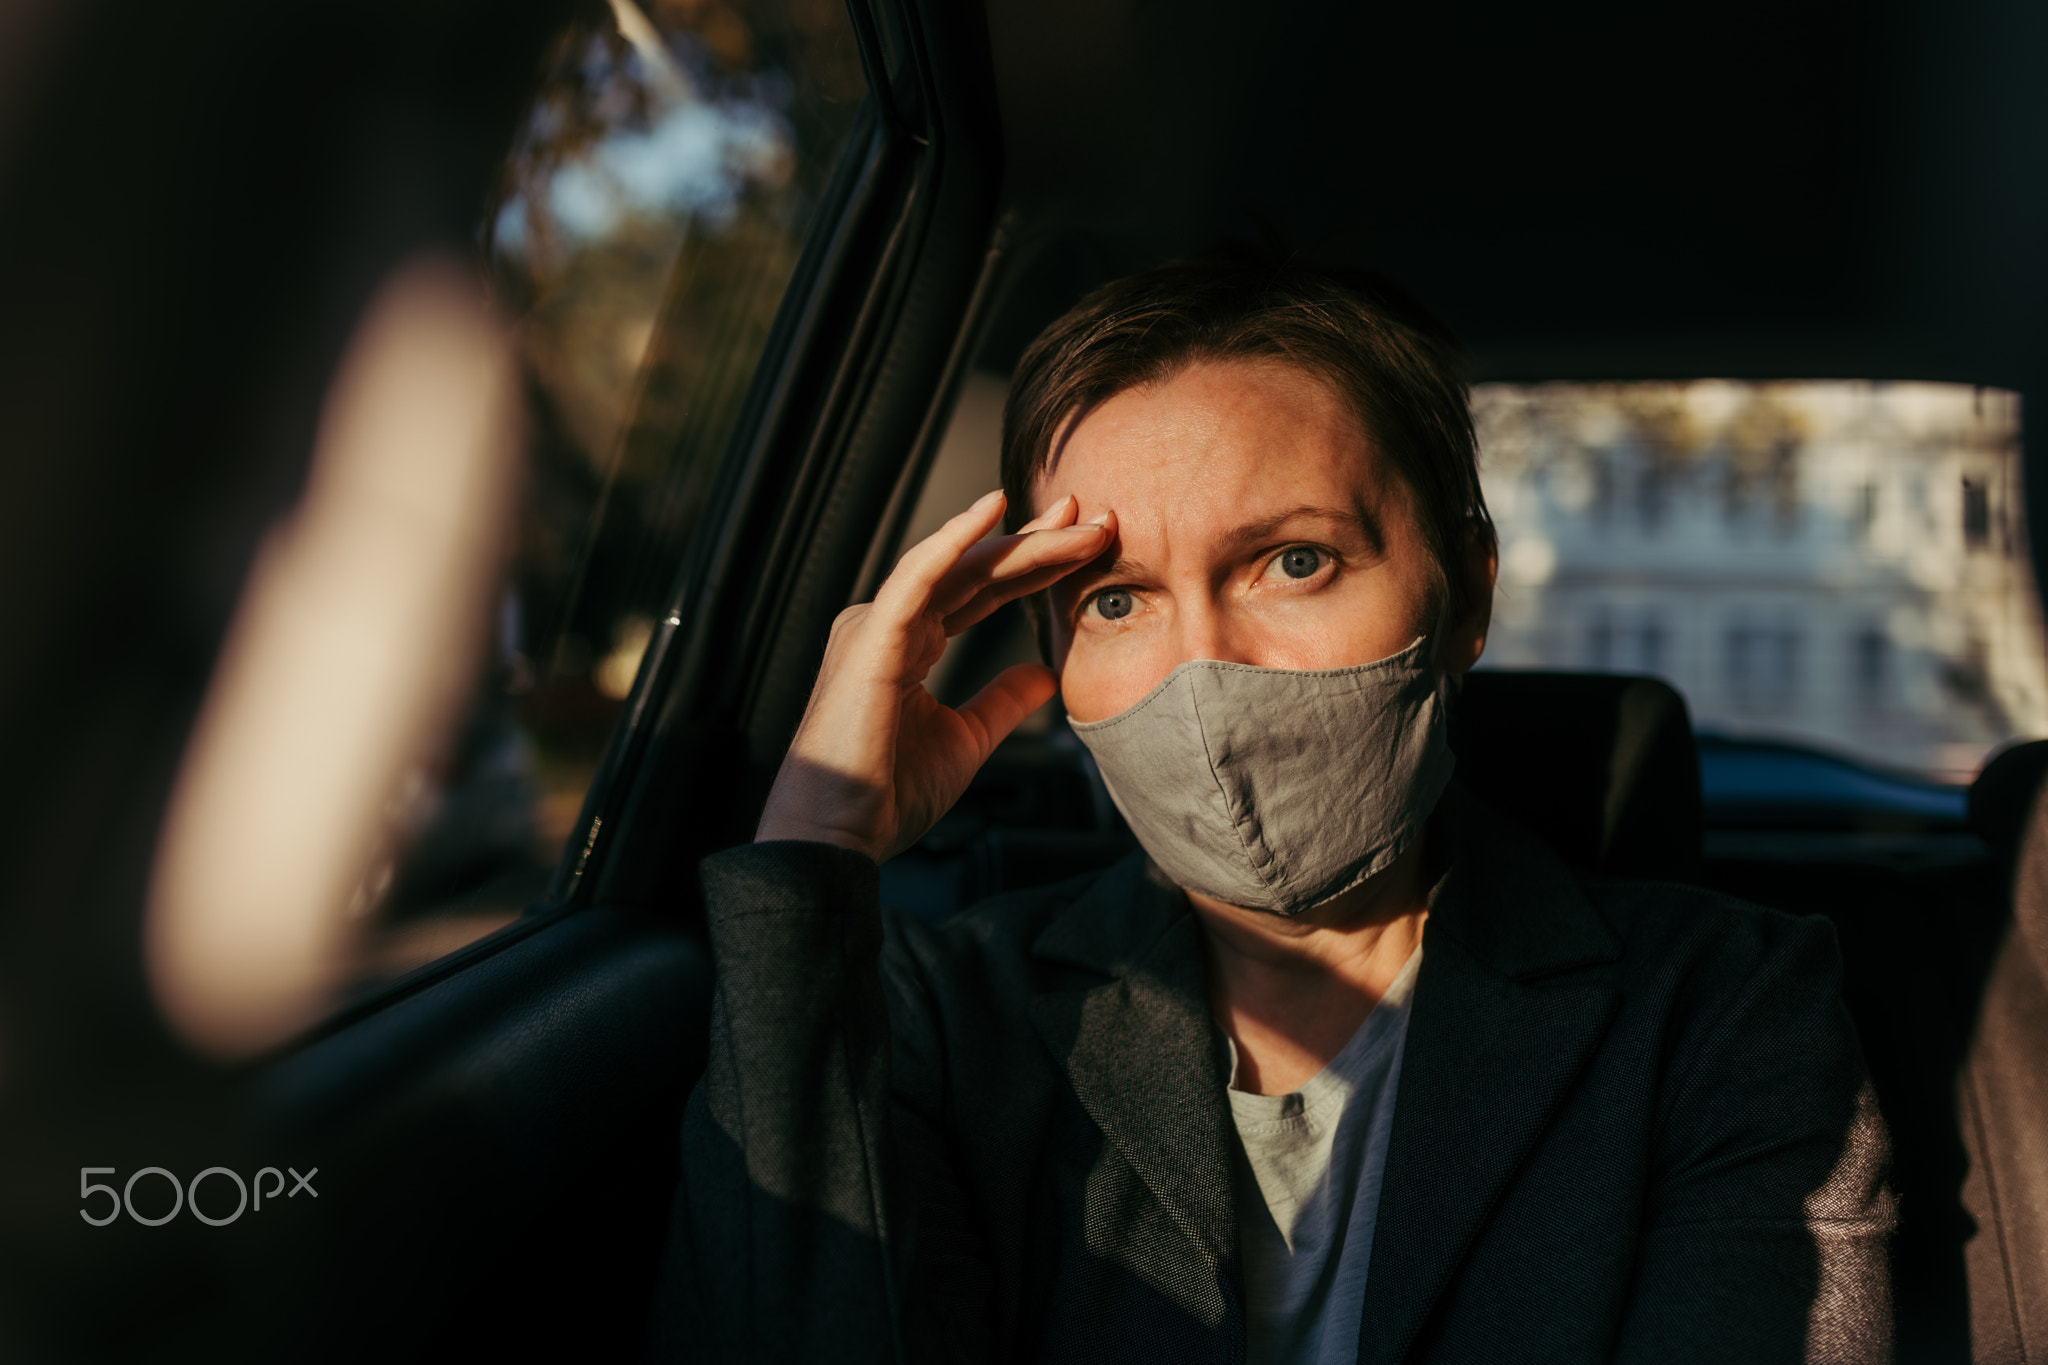 Anxious businesswoman sitting inside of the car and looking at camera